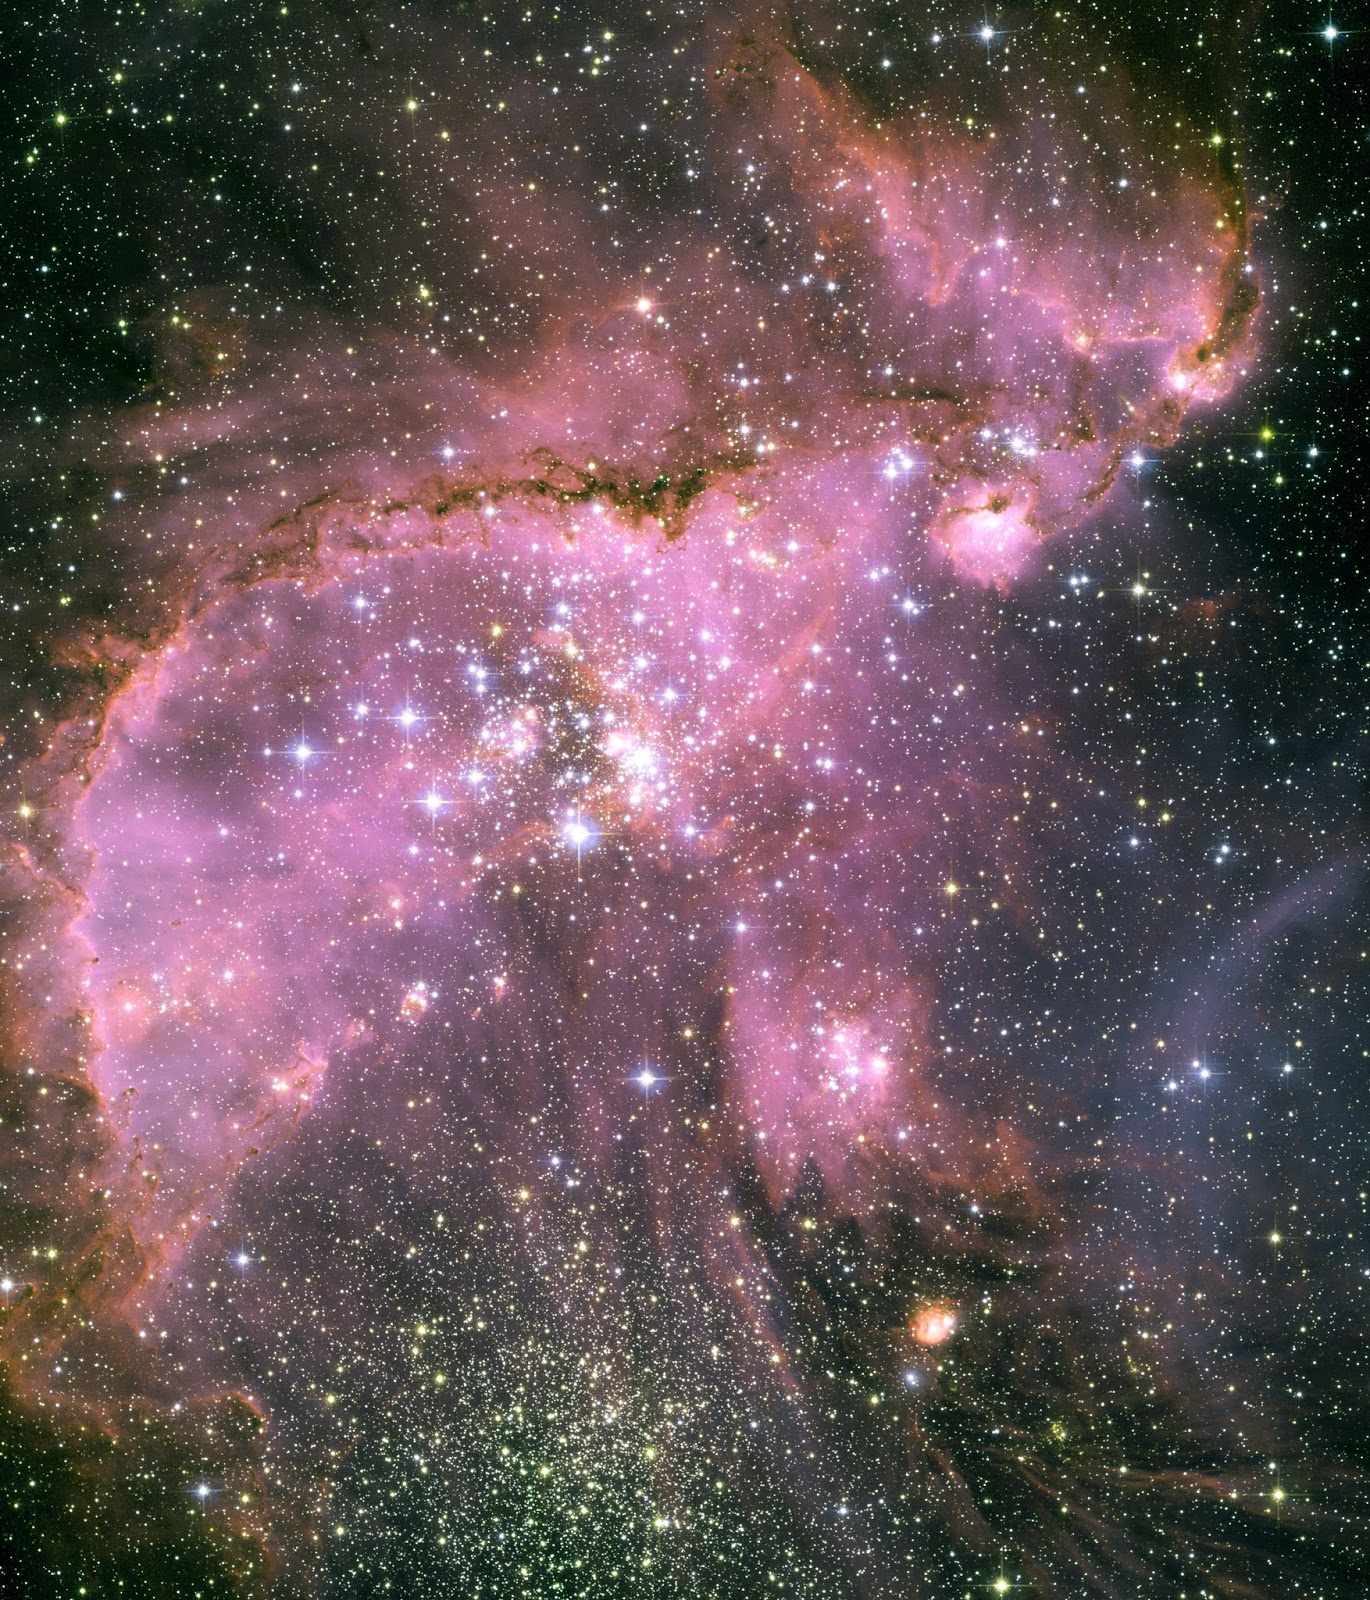 Star cluster: NGC 346 - Hubble Space Telescope - Small Magellanic Cloud - Milky Way